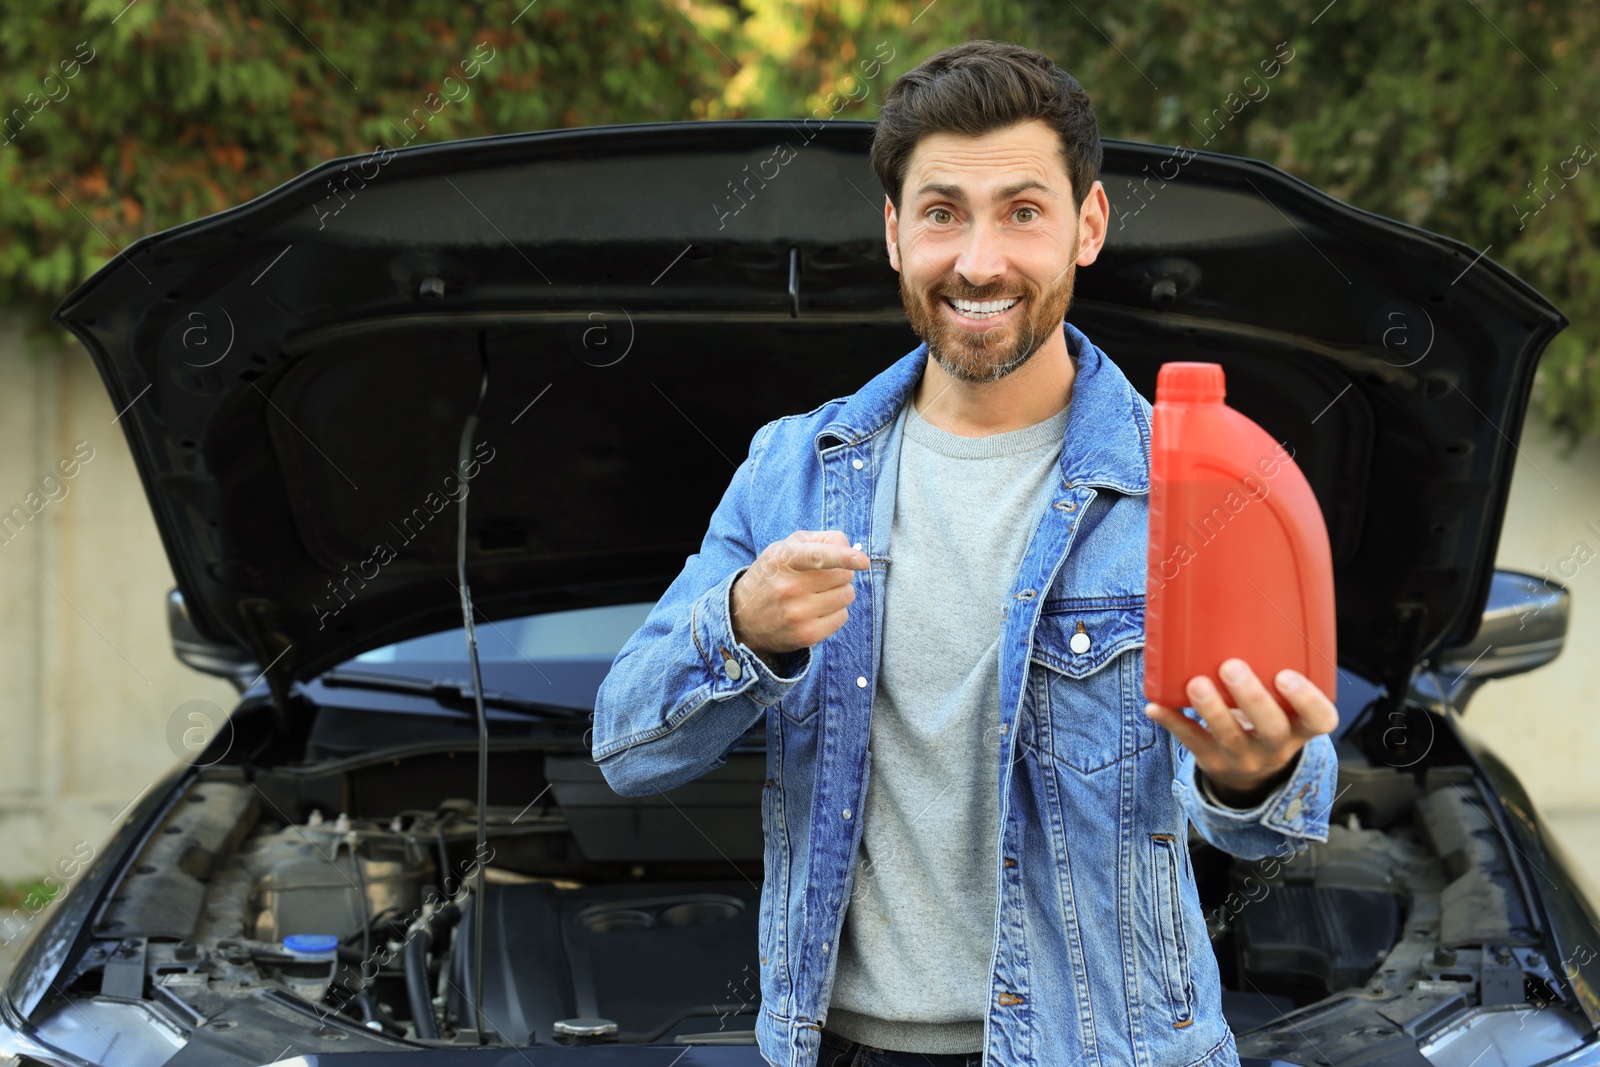 Photo of Smiling man pointing at red container of motor oil near car outdoors